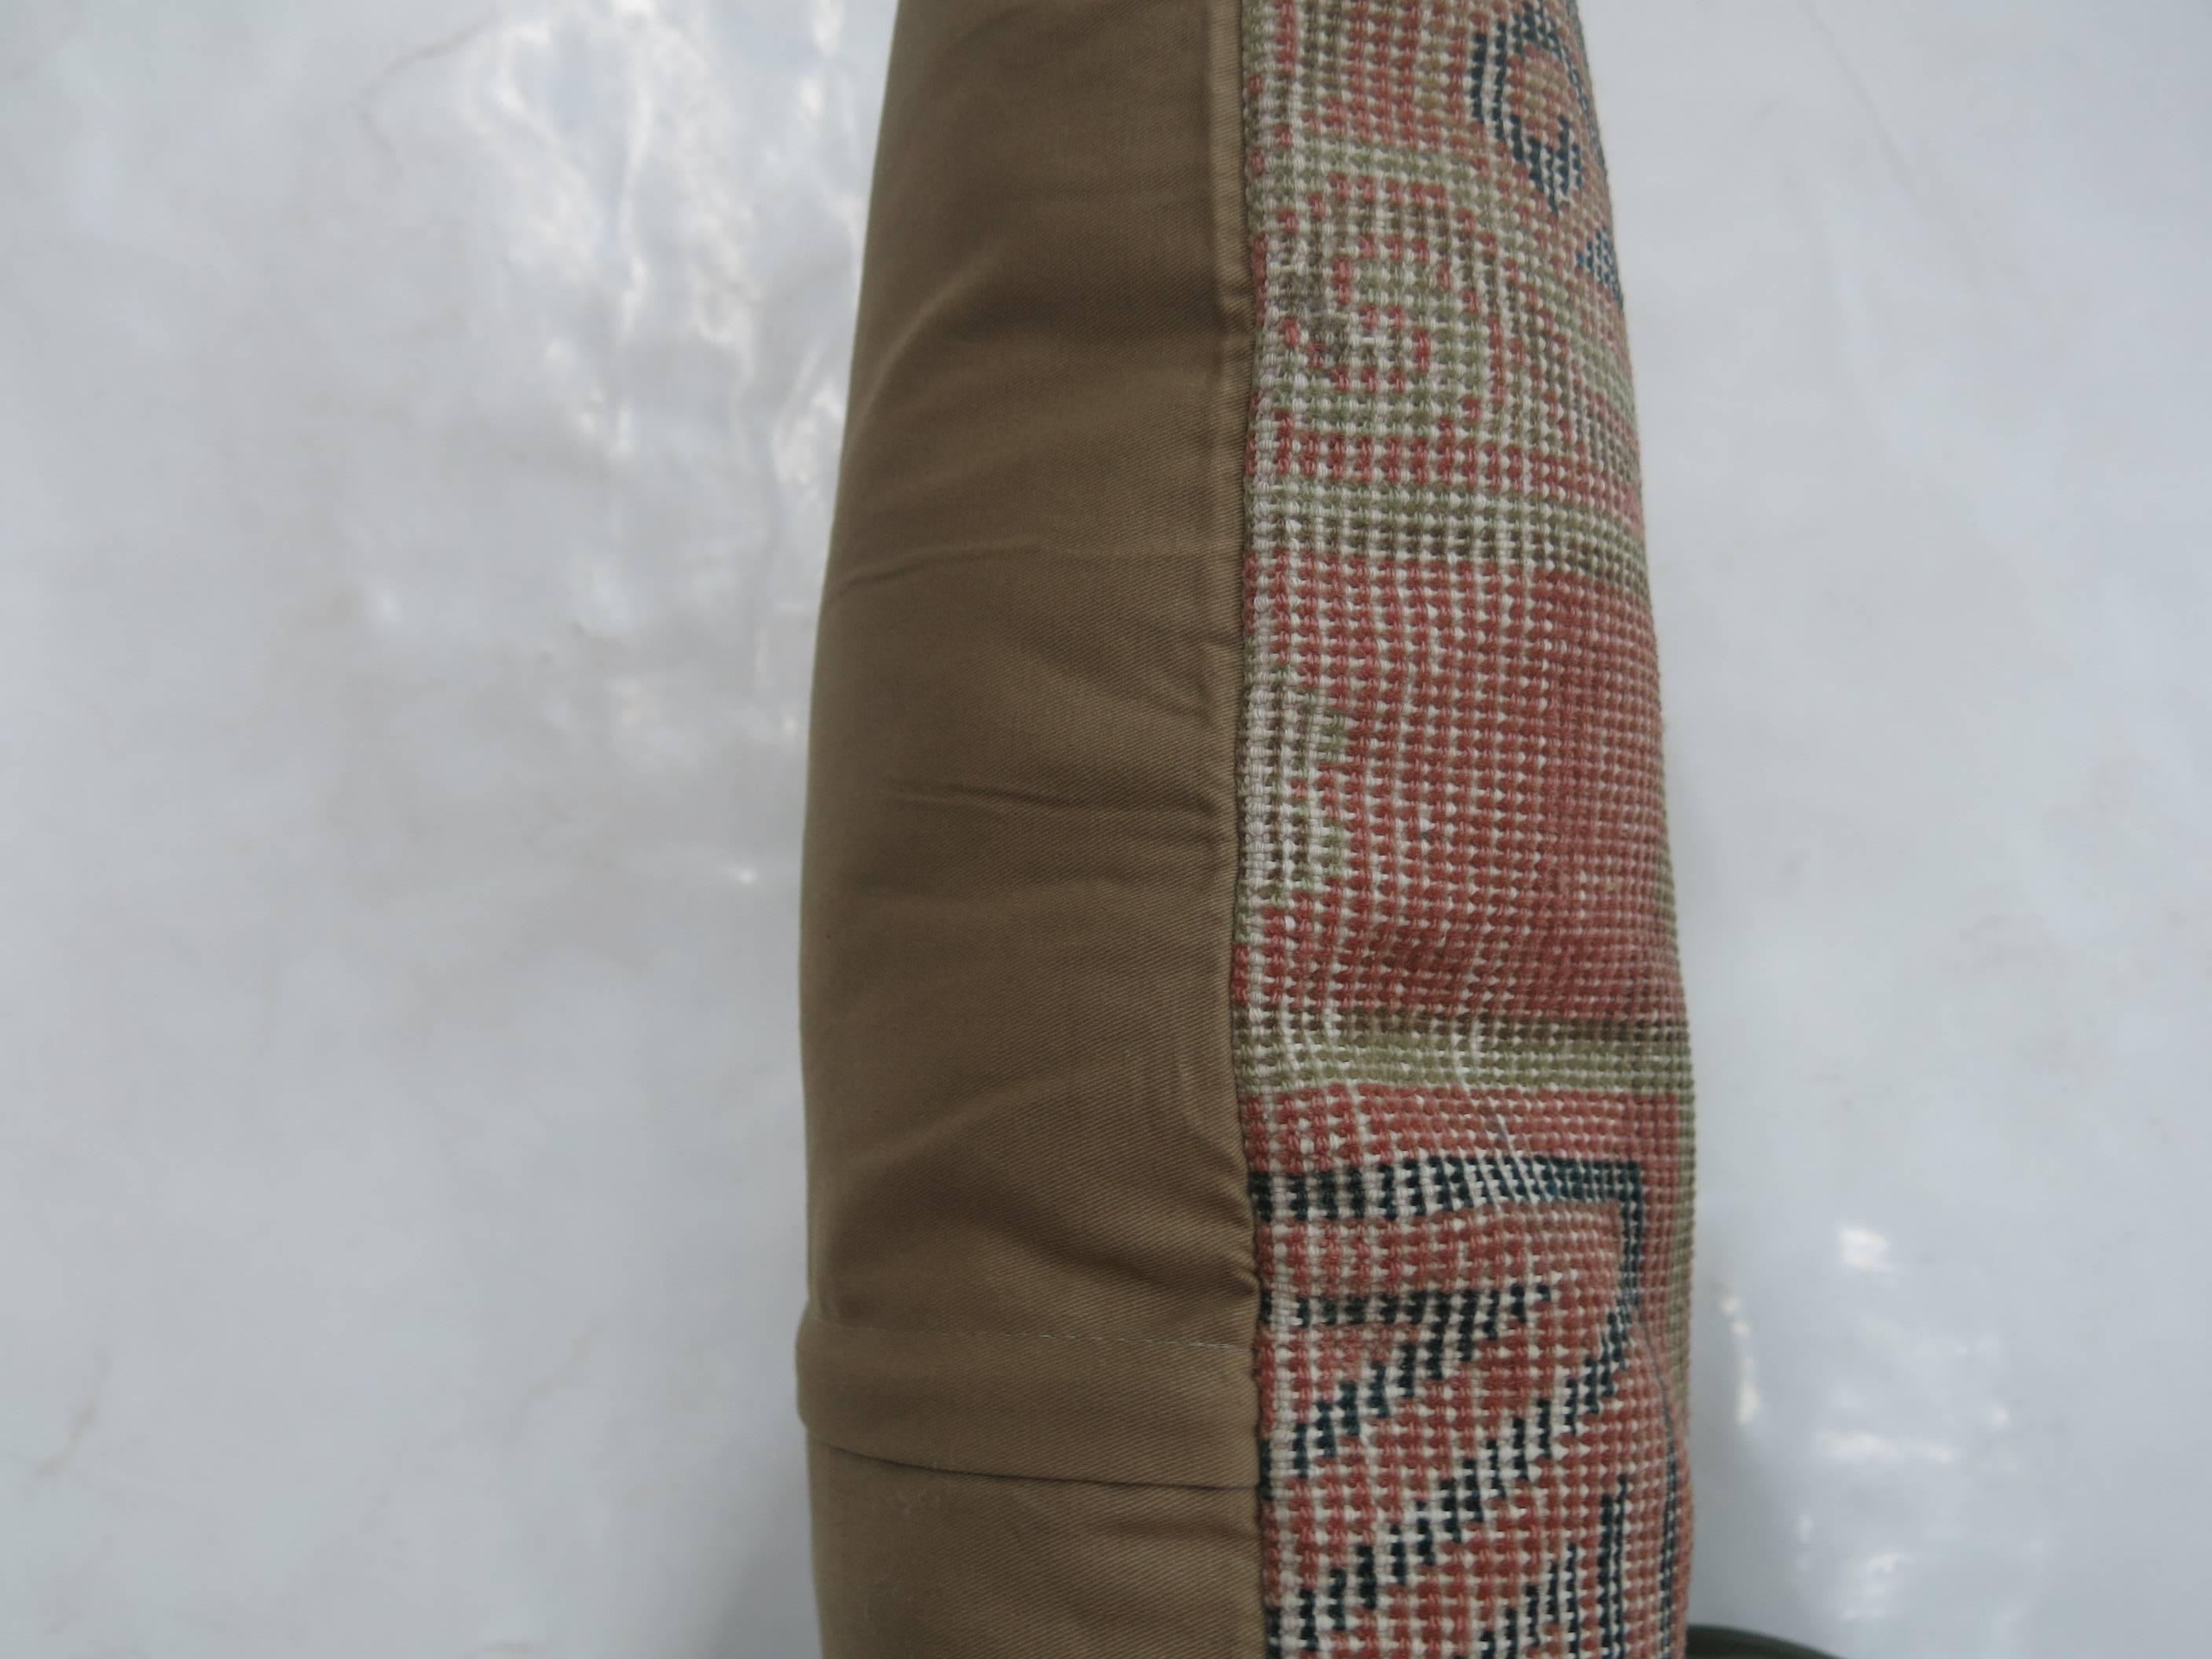 Pillow made from a 19th century antique Khotan rug with cotton back. Zipper closure included.

16'' x 16''